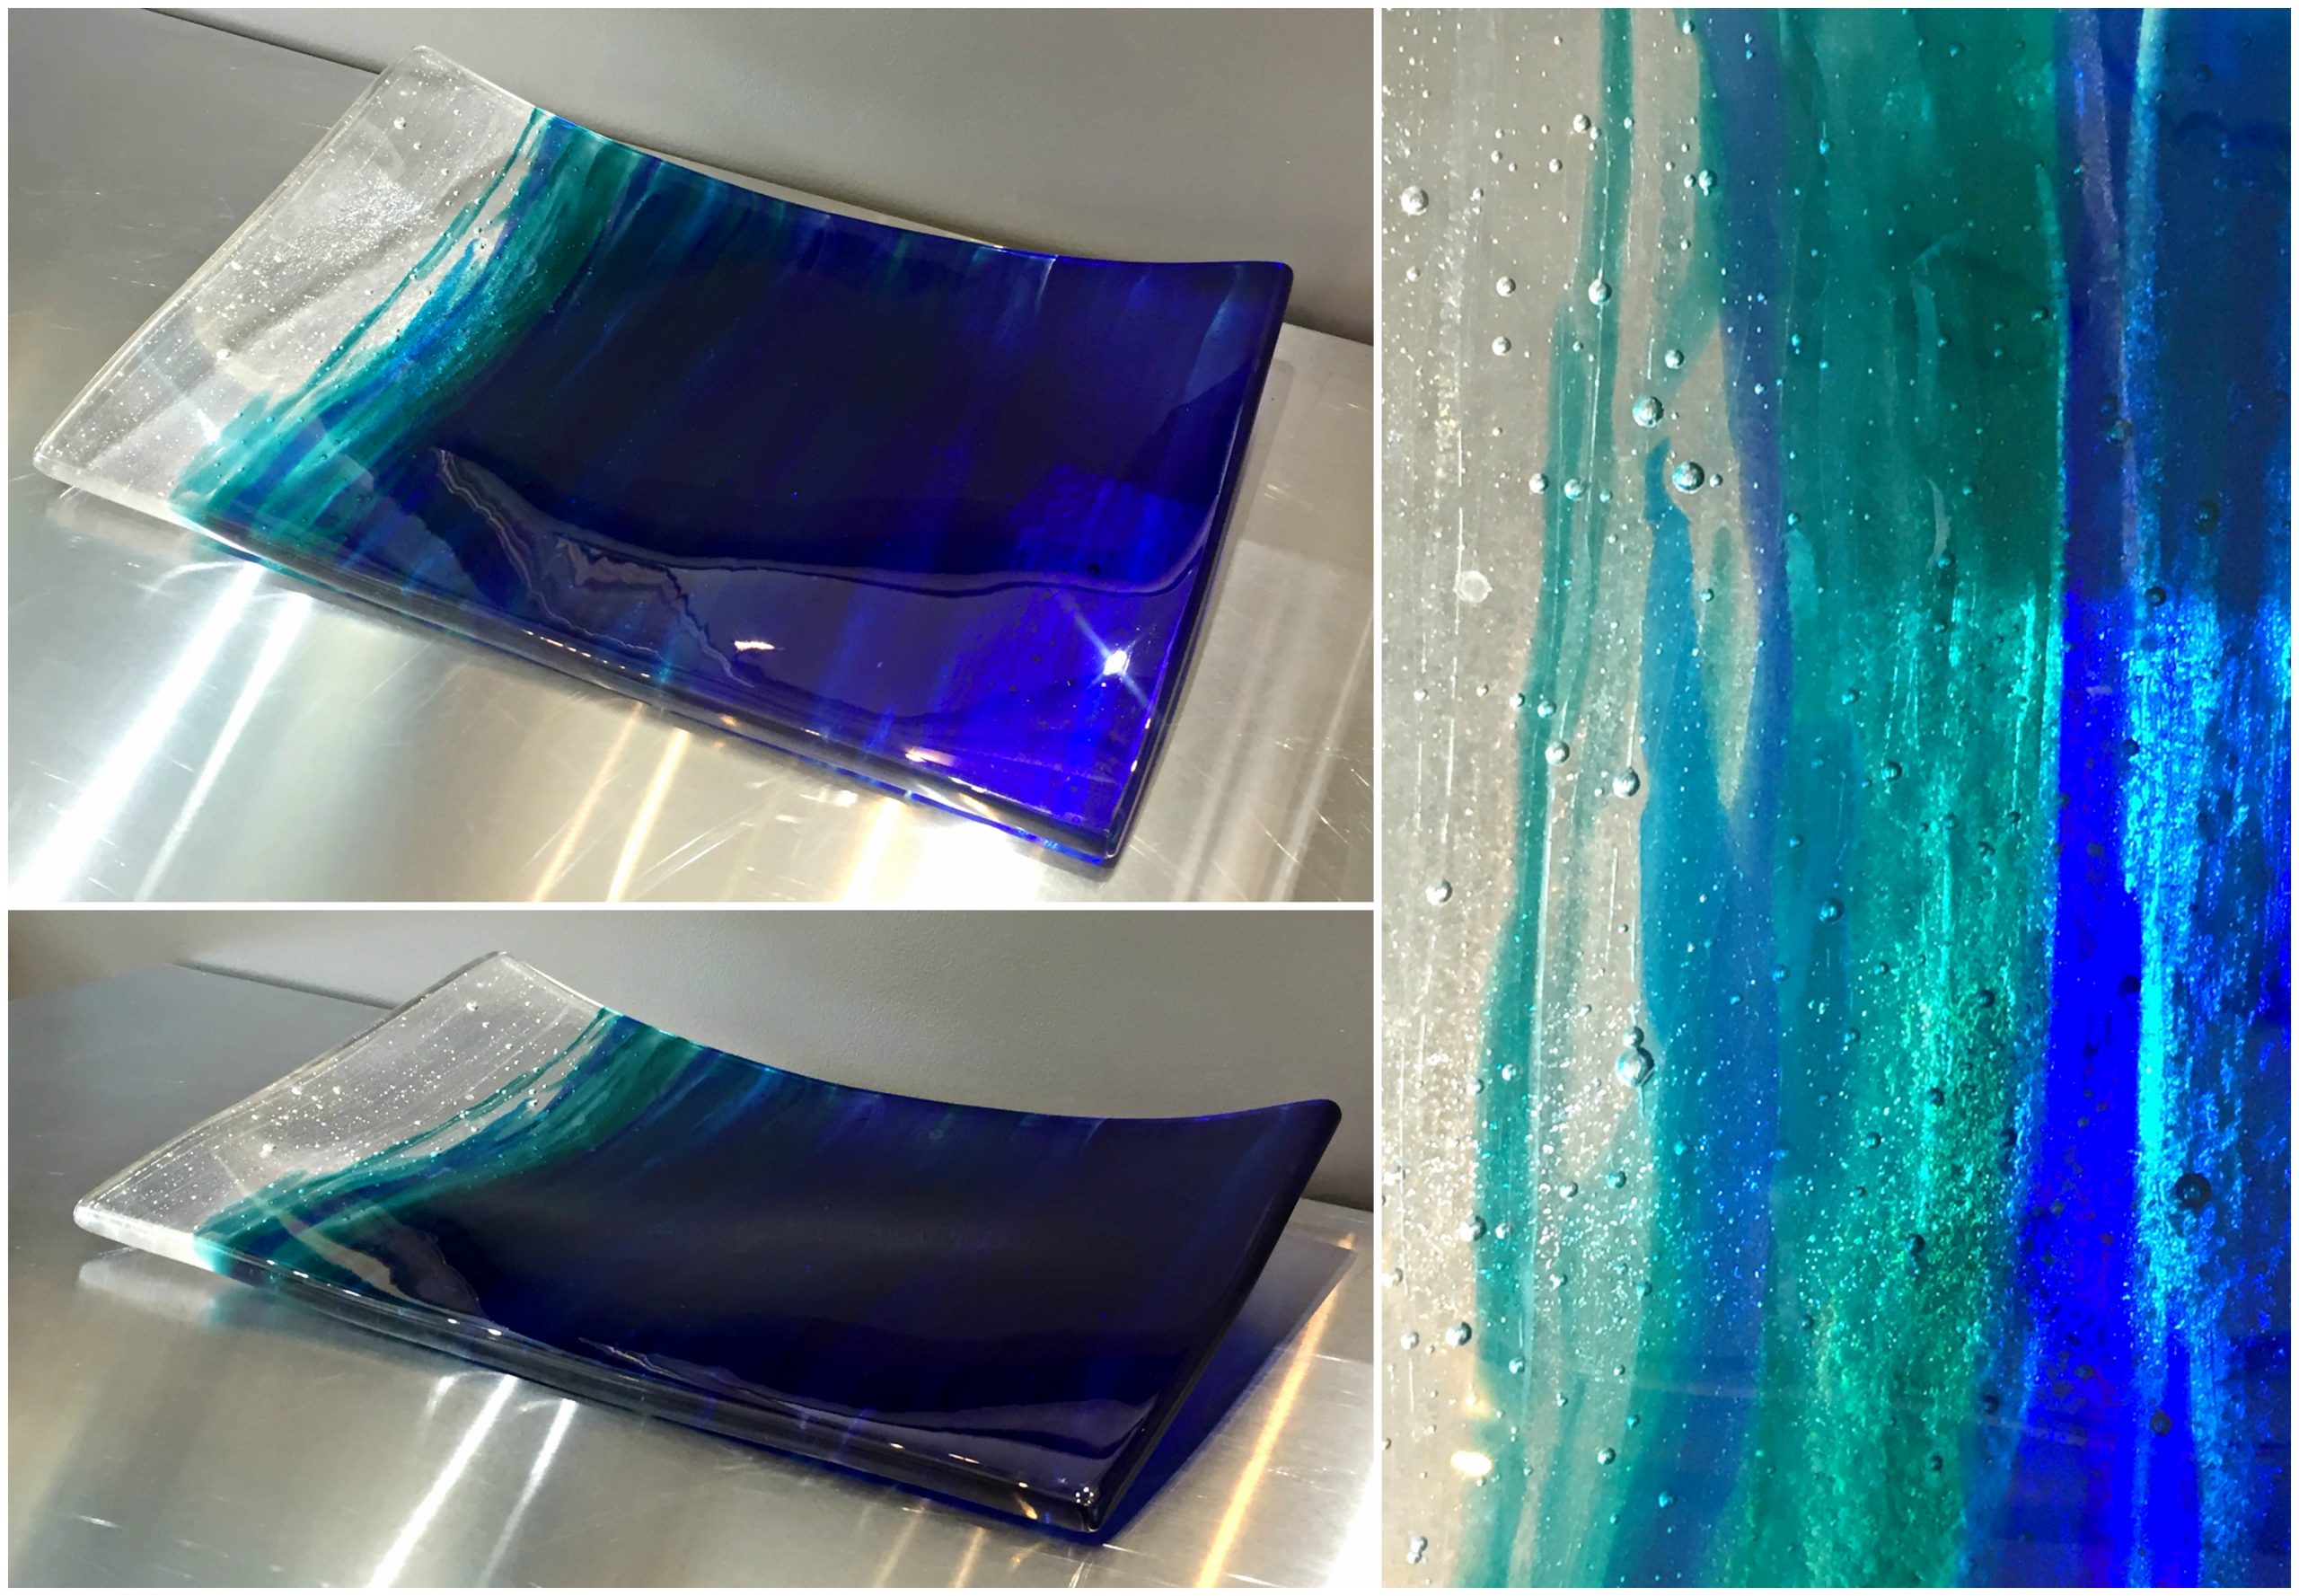 Ocean Blues, cast glass platter by Heather Cuell | Effusion Art Gallery + Cast Glass Studio, Invermere BC